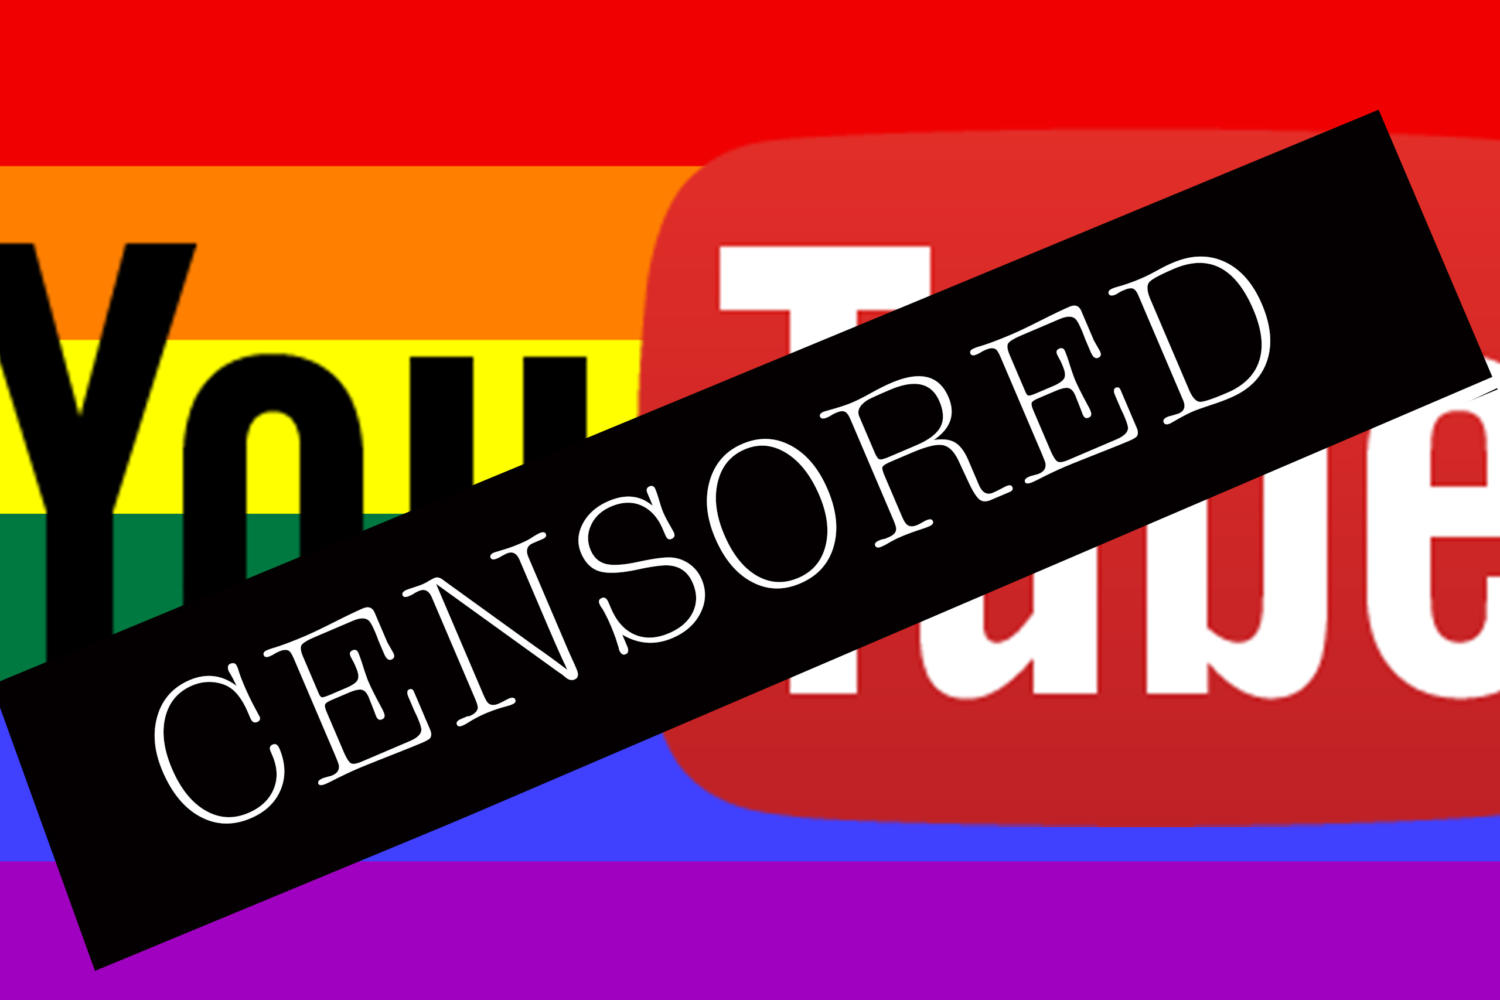 YouTube%E2%80%99s+Restrictions+on+LGBT+Content+Have+Severe+Consequences